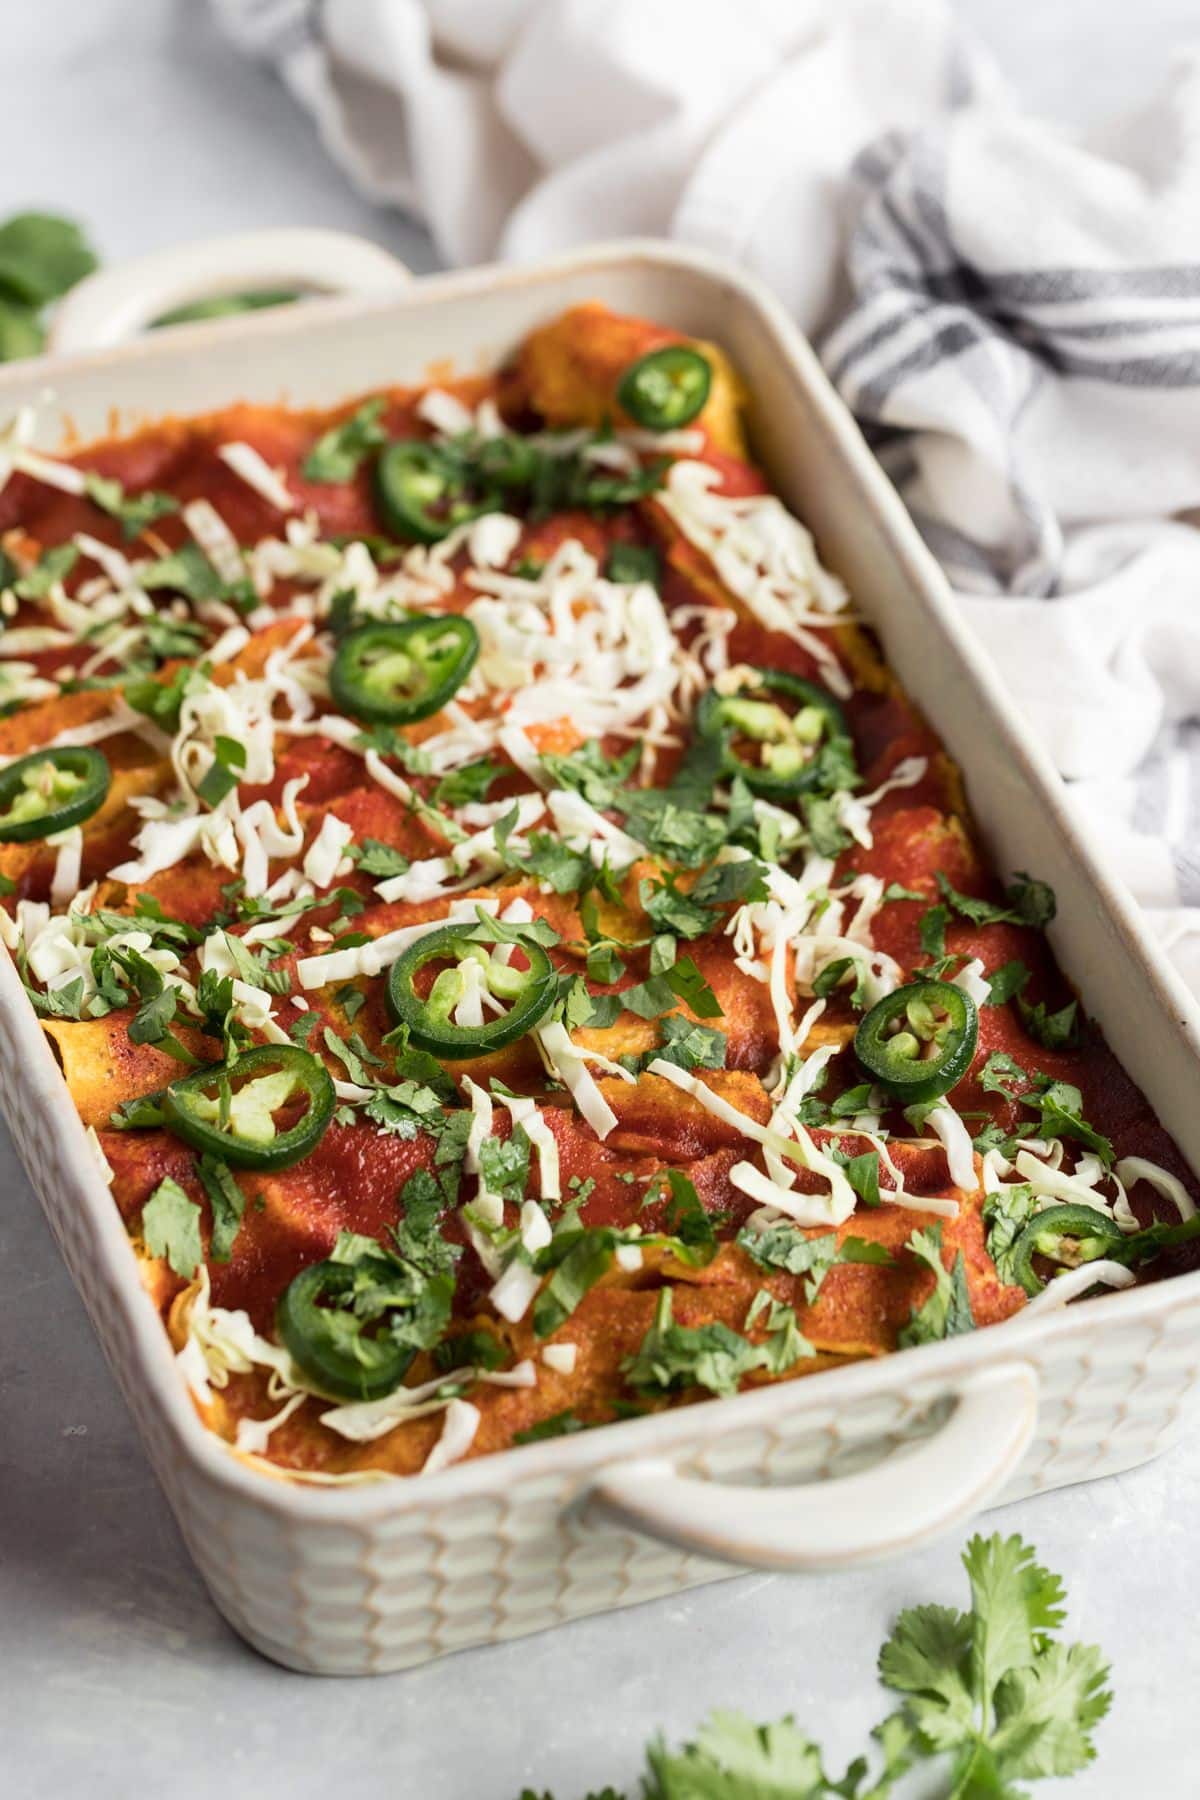 A casserole dish of high protein chicken enchiladas on the table.